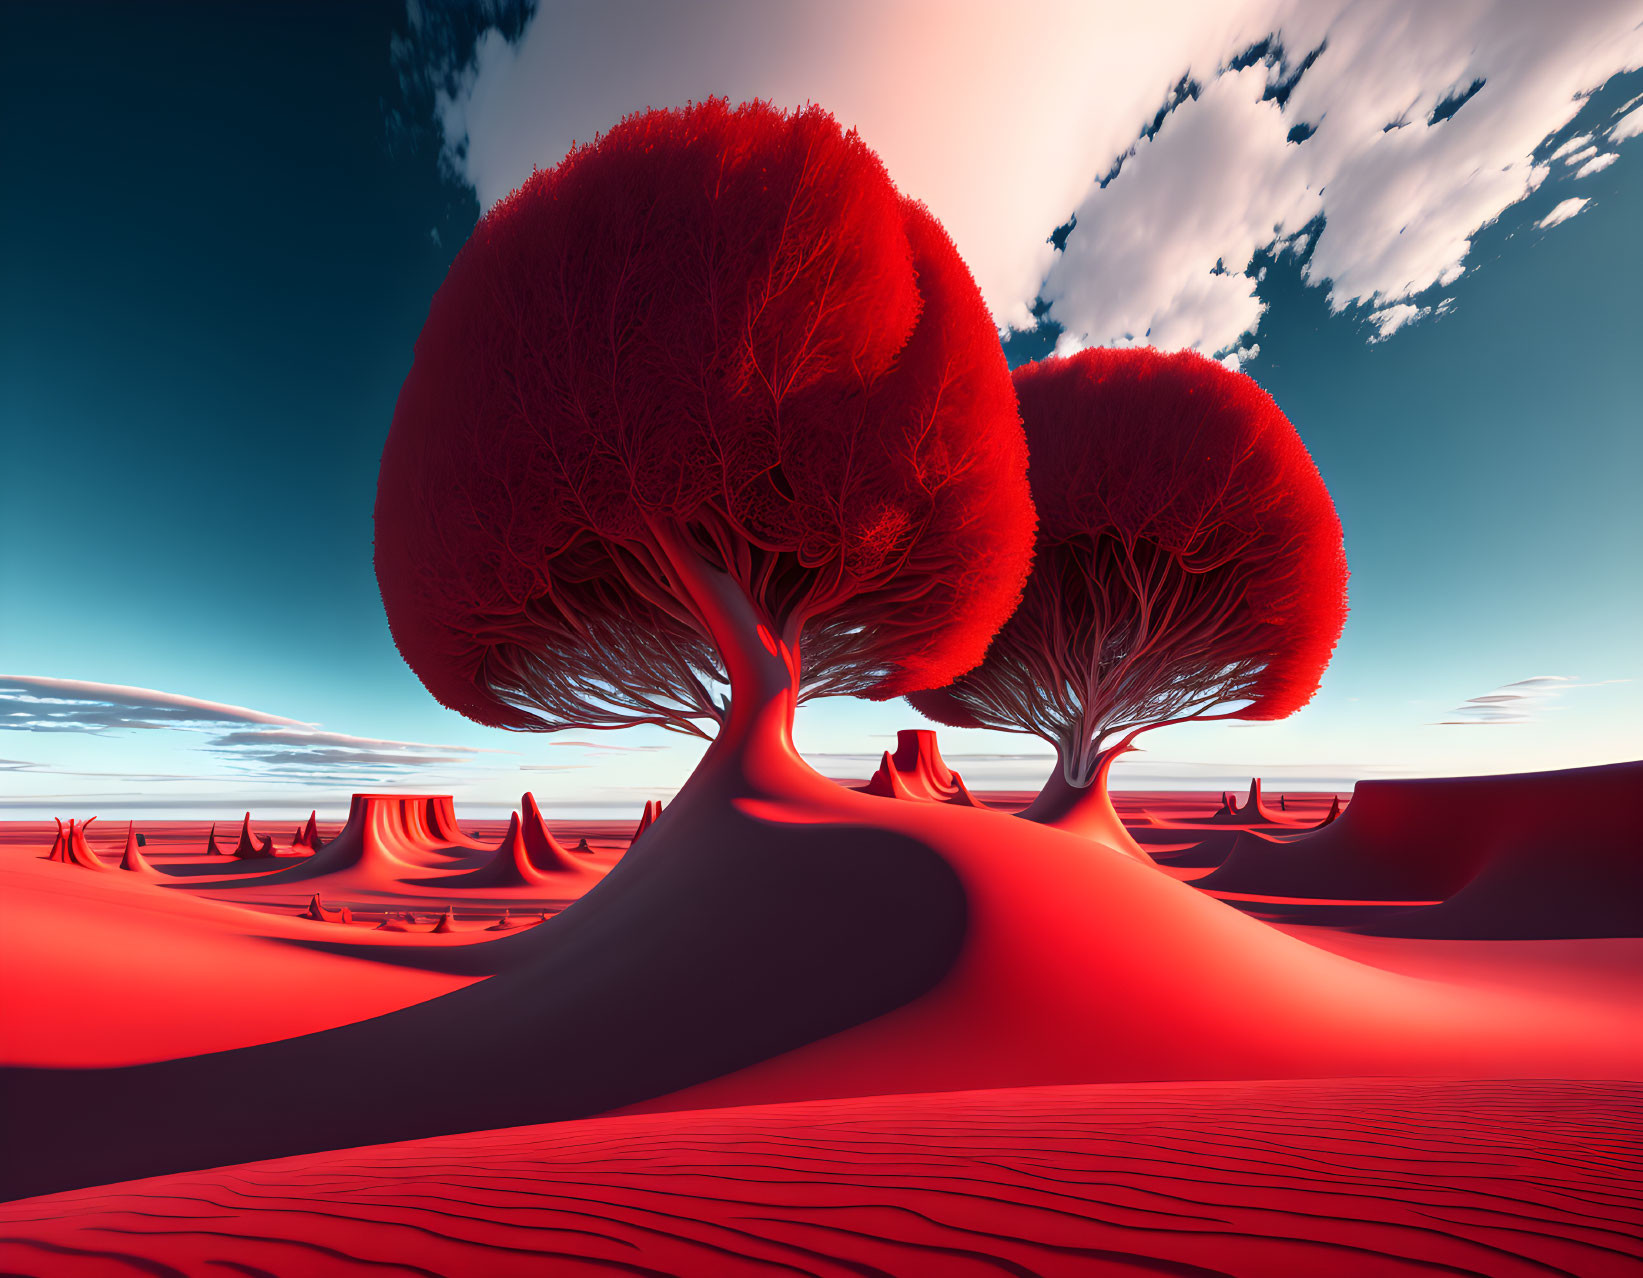 Red-tinted surreal landscape with stylized trees under blue sky